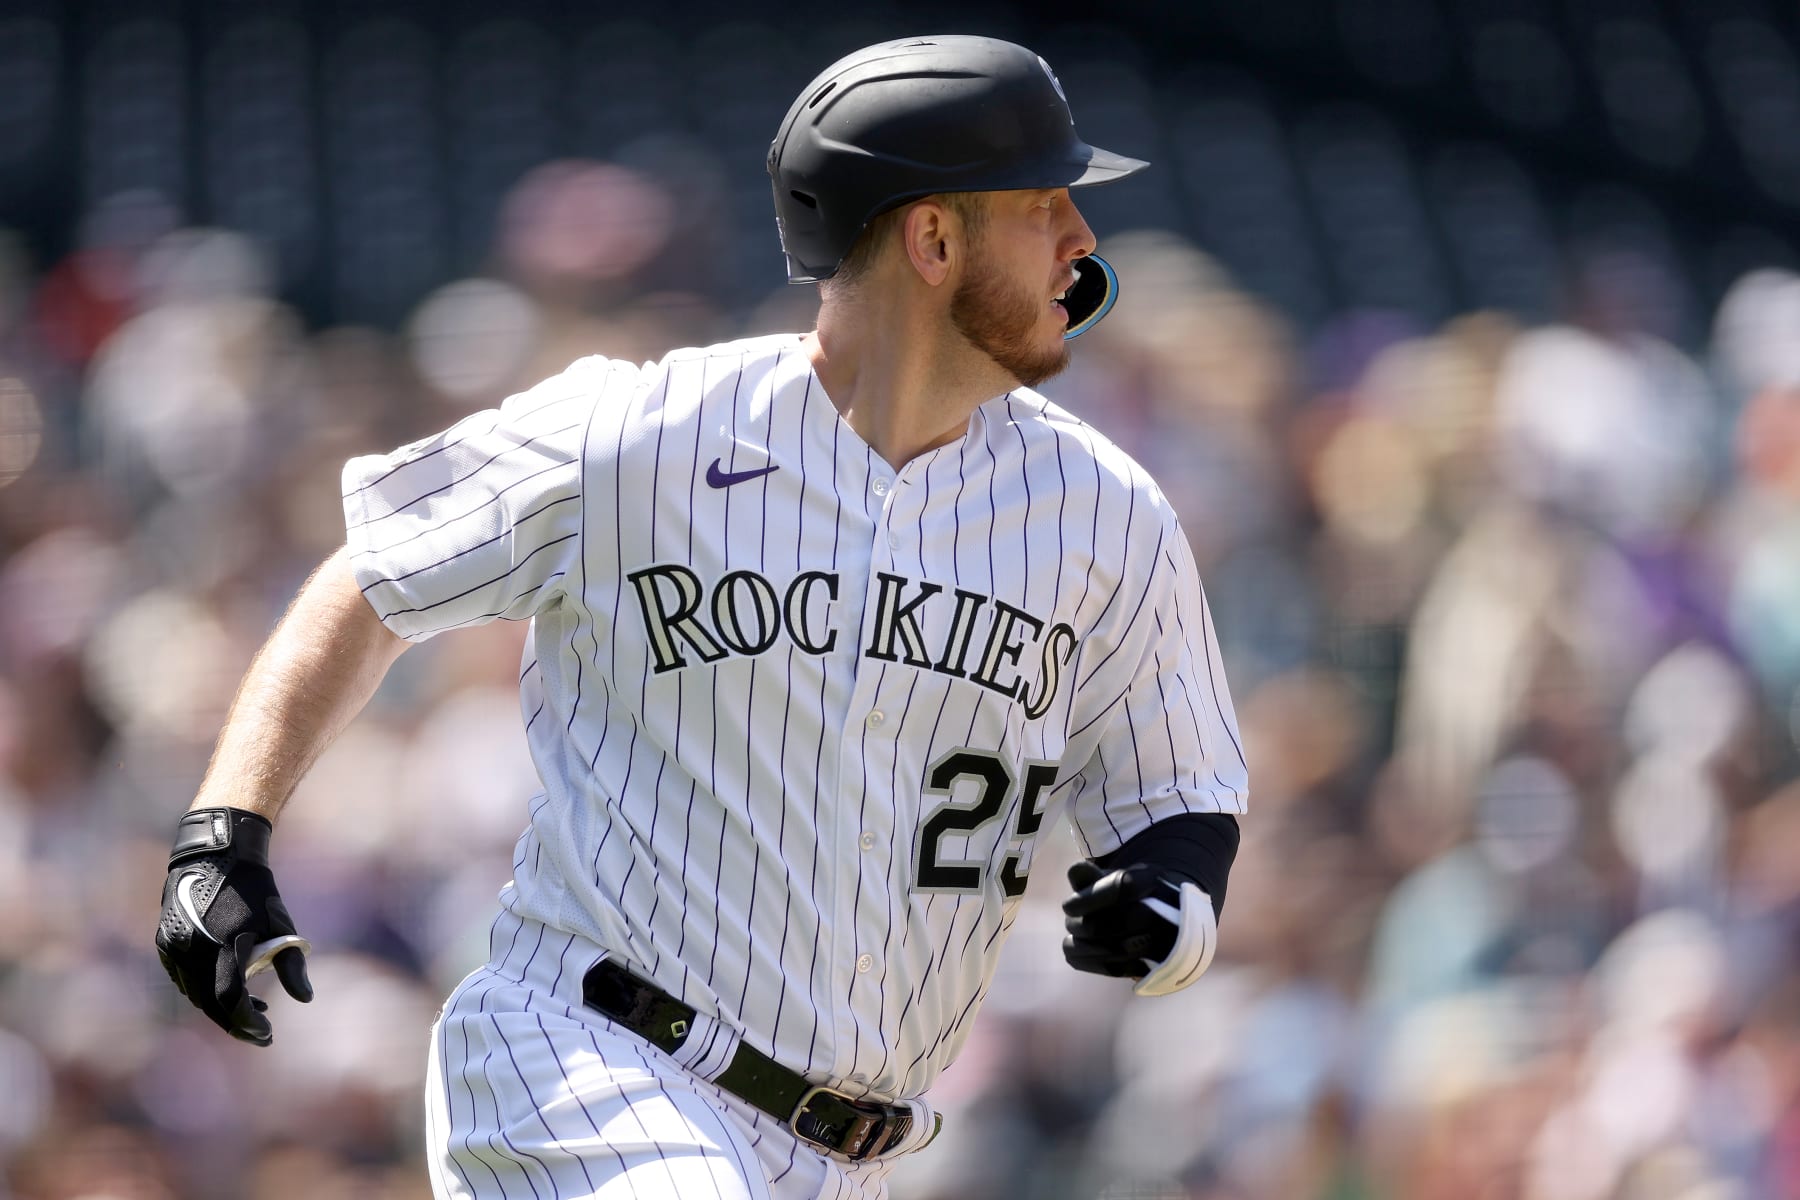 Rockies score 11 runs in 5th in 18-9 win over Mets - The San Diego